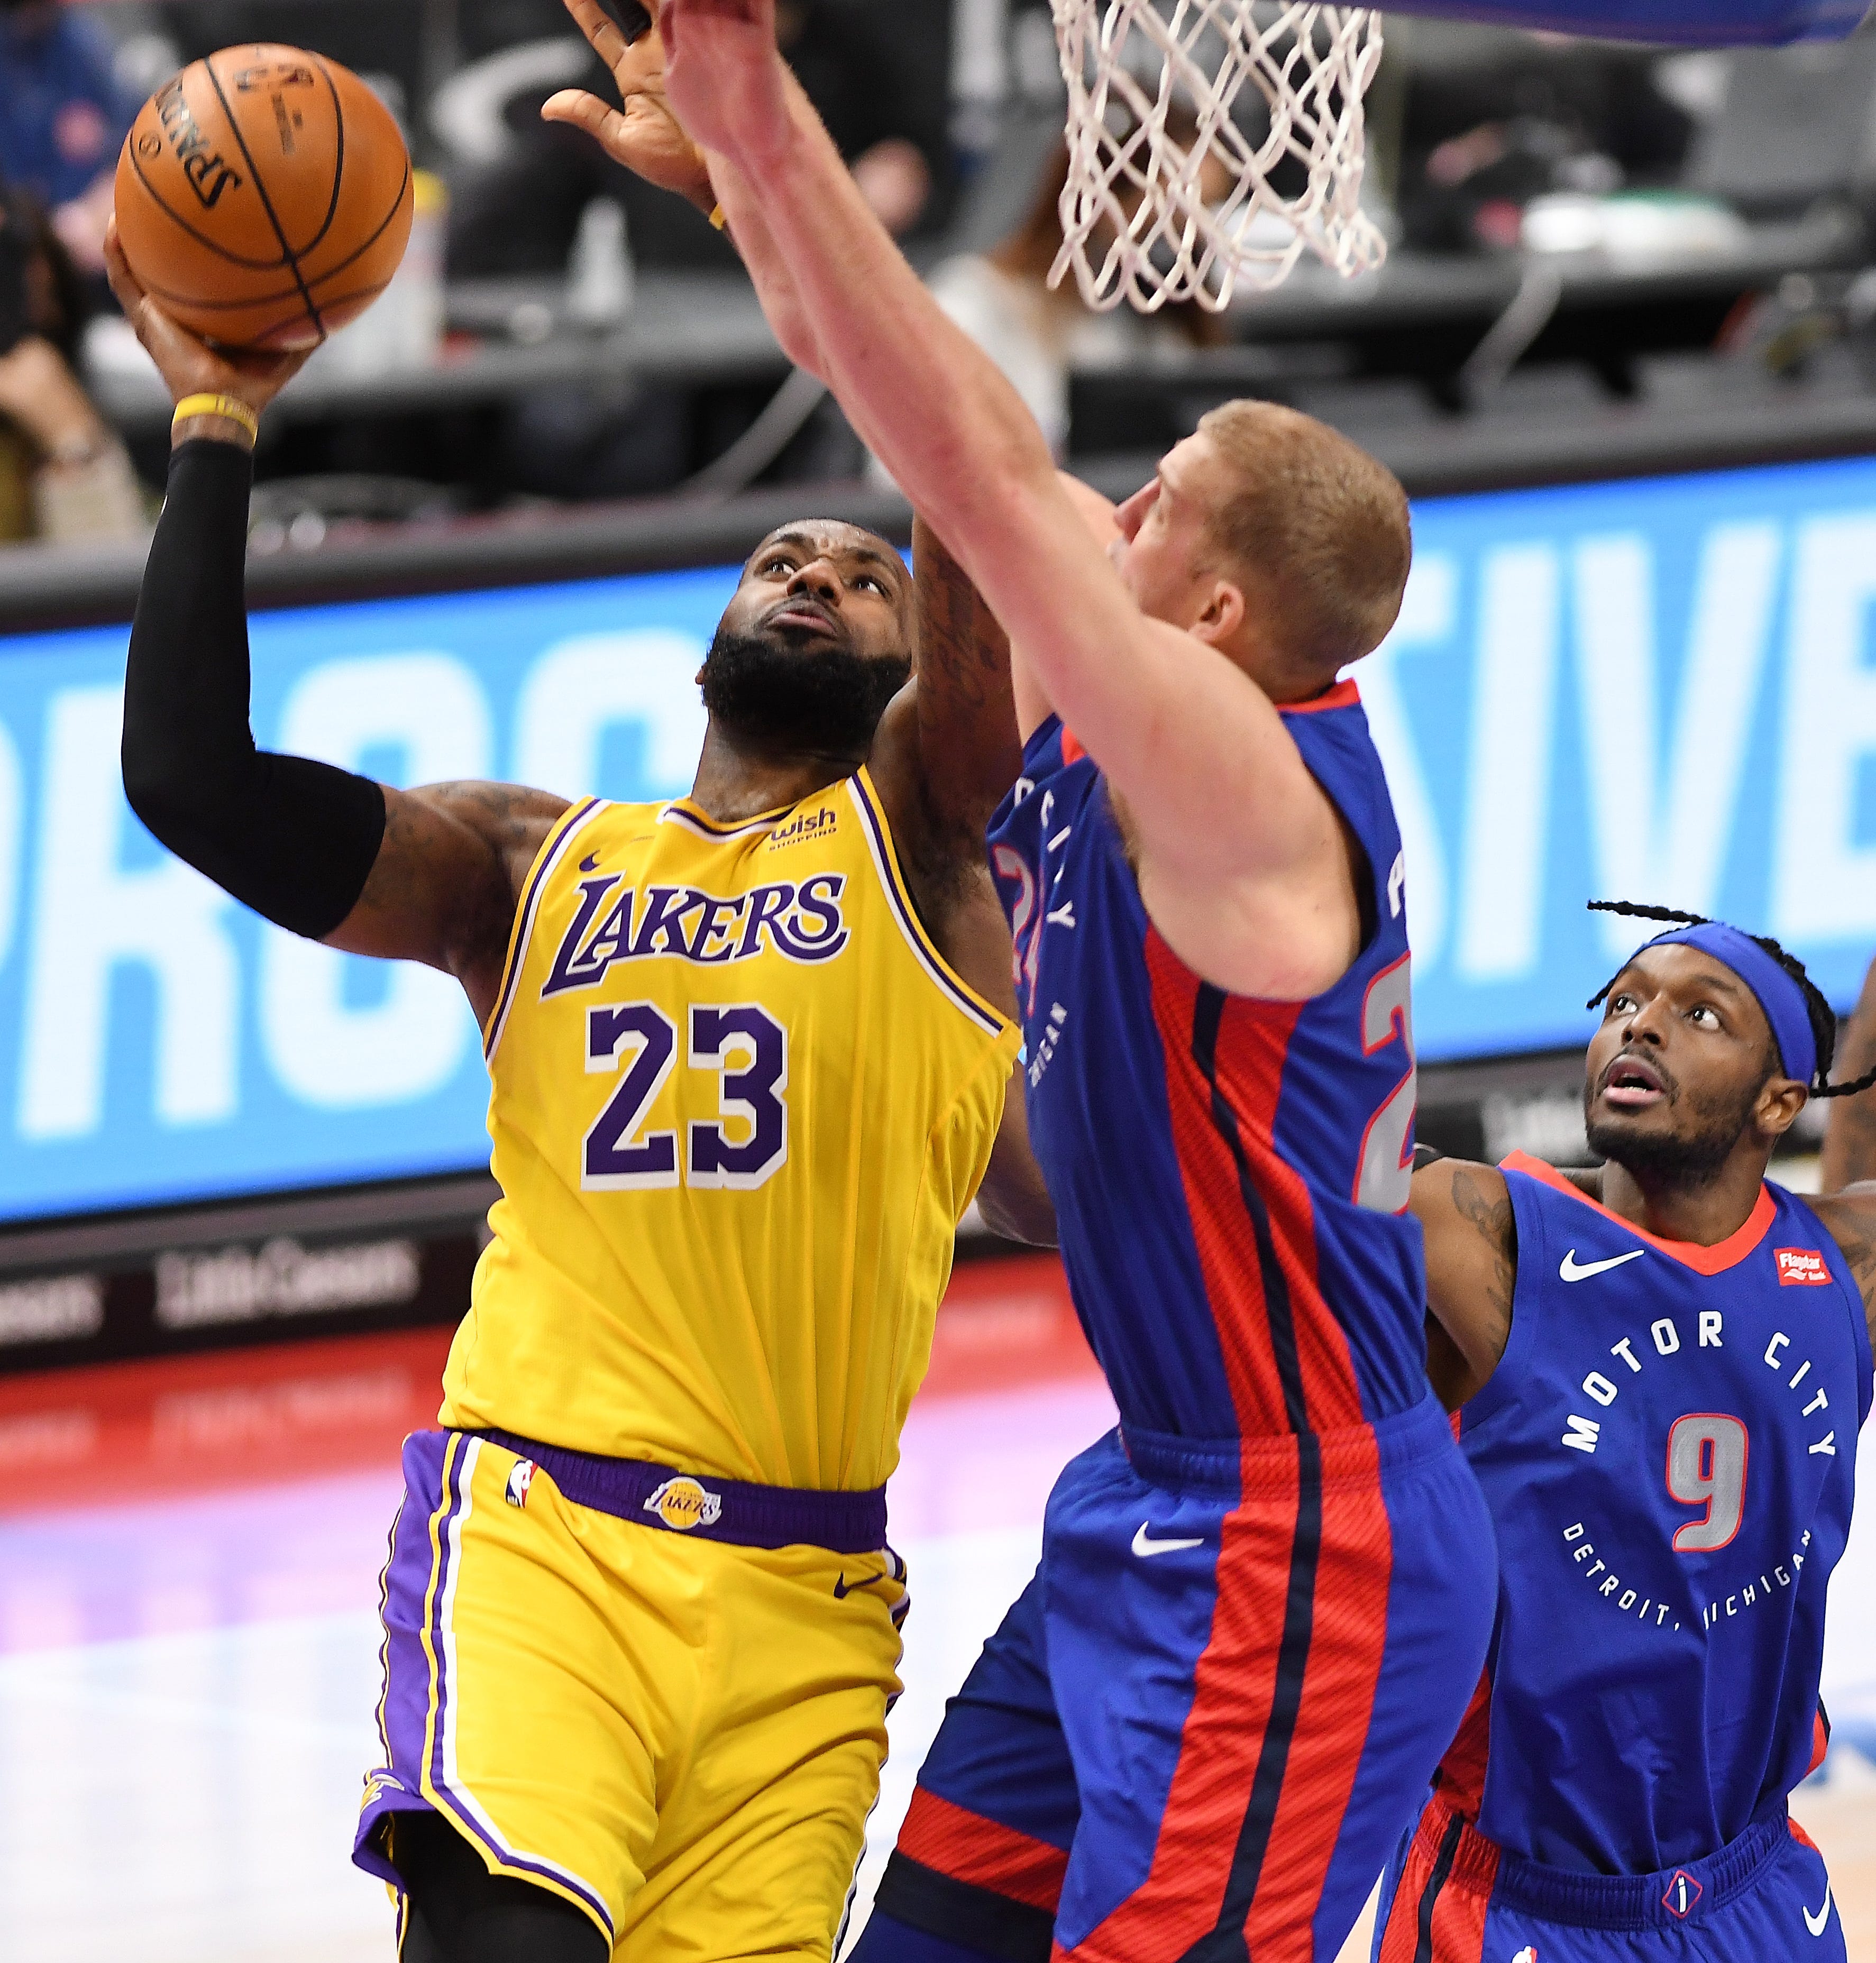 Pistons' Mason Plumlee defends Lakers' LeBron James in the fourth quarter.